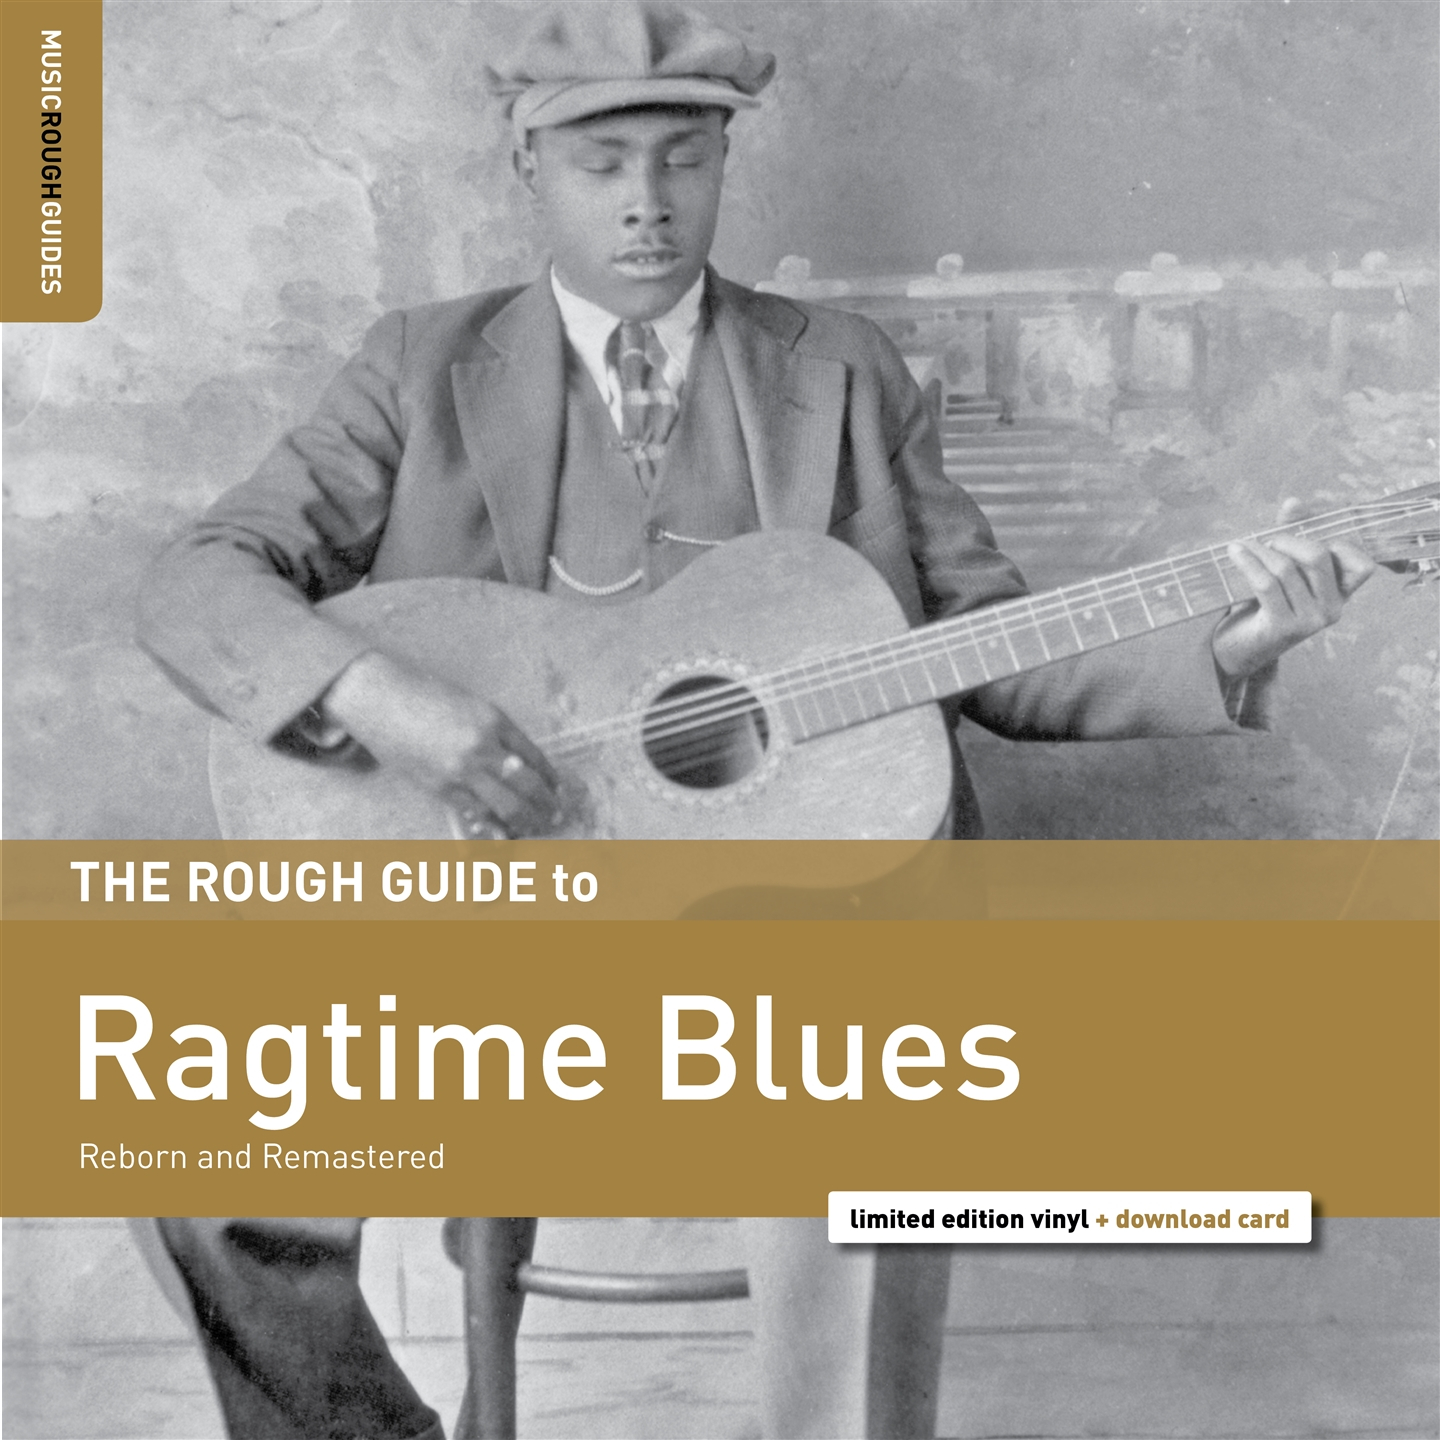 THE ROUGH GUIDE TO RAGTIME BLUES [LP]